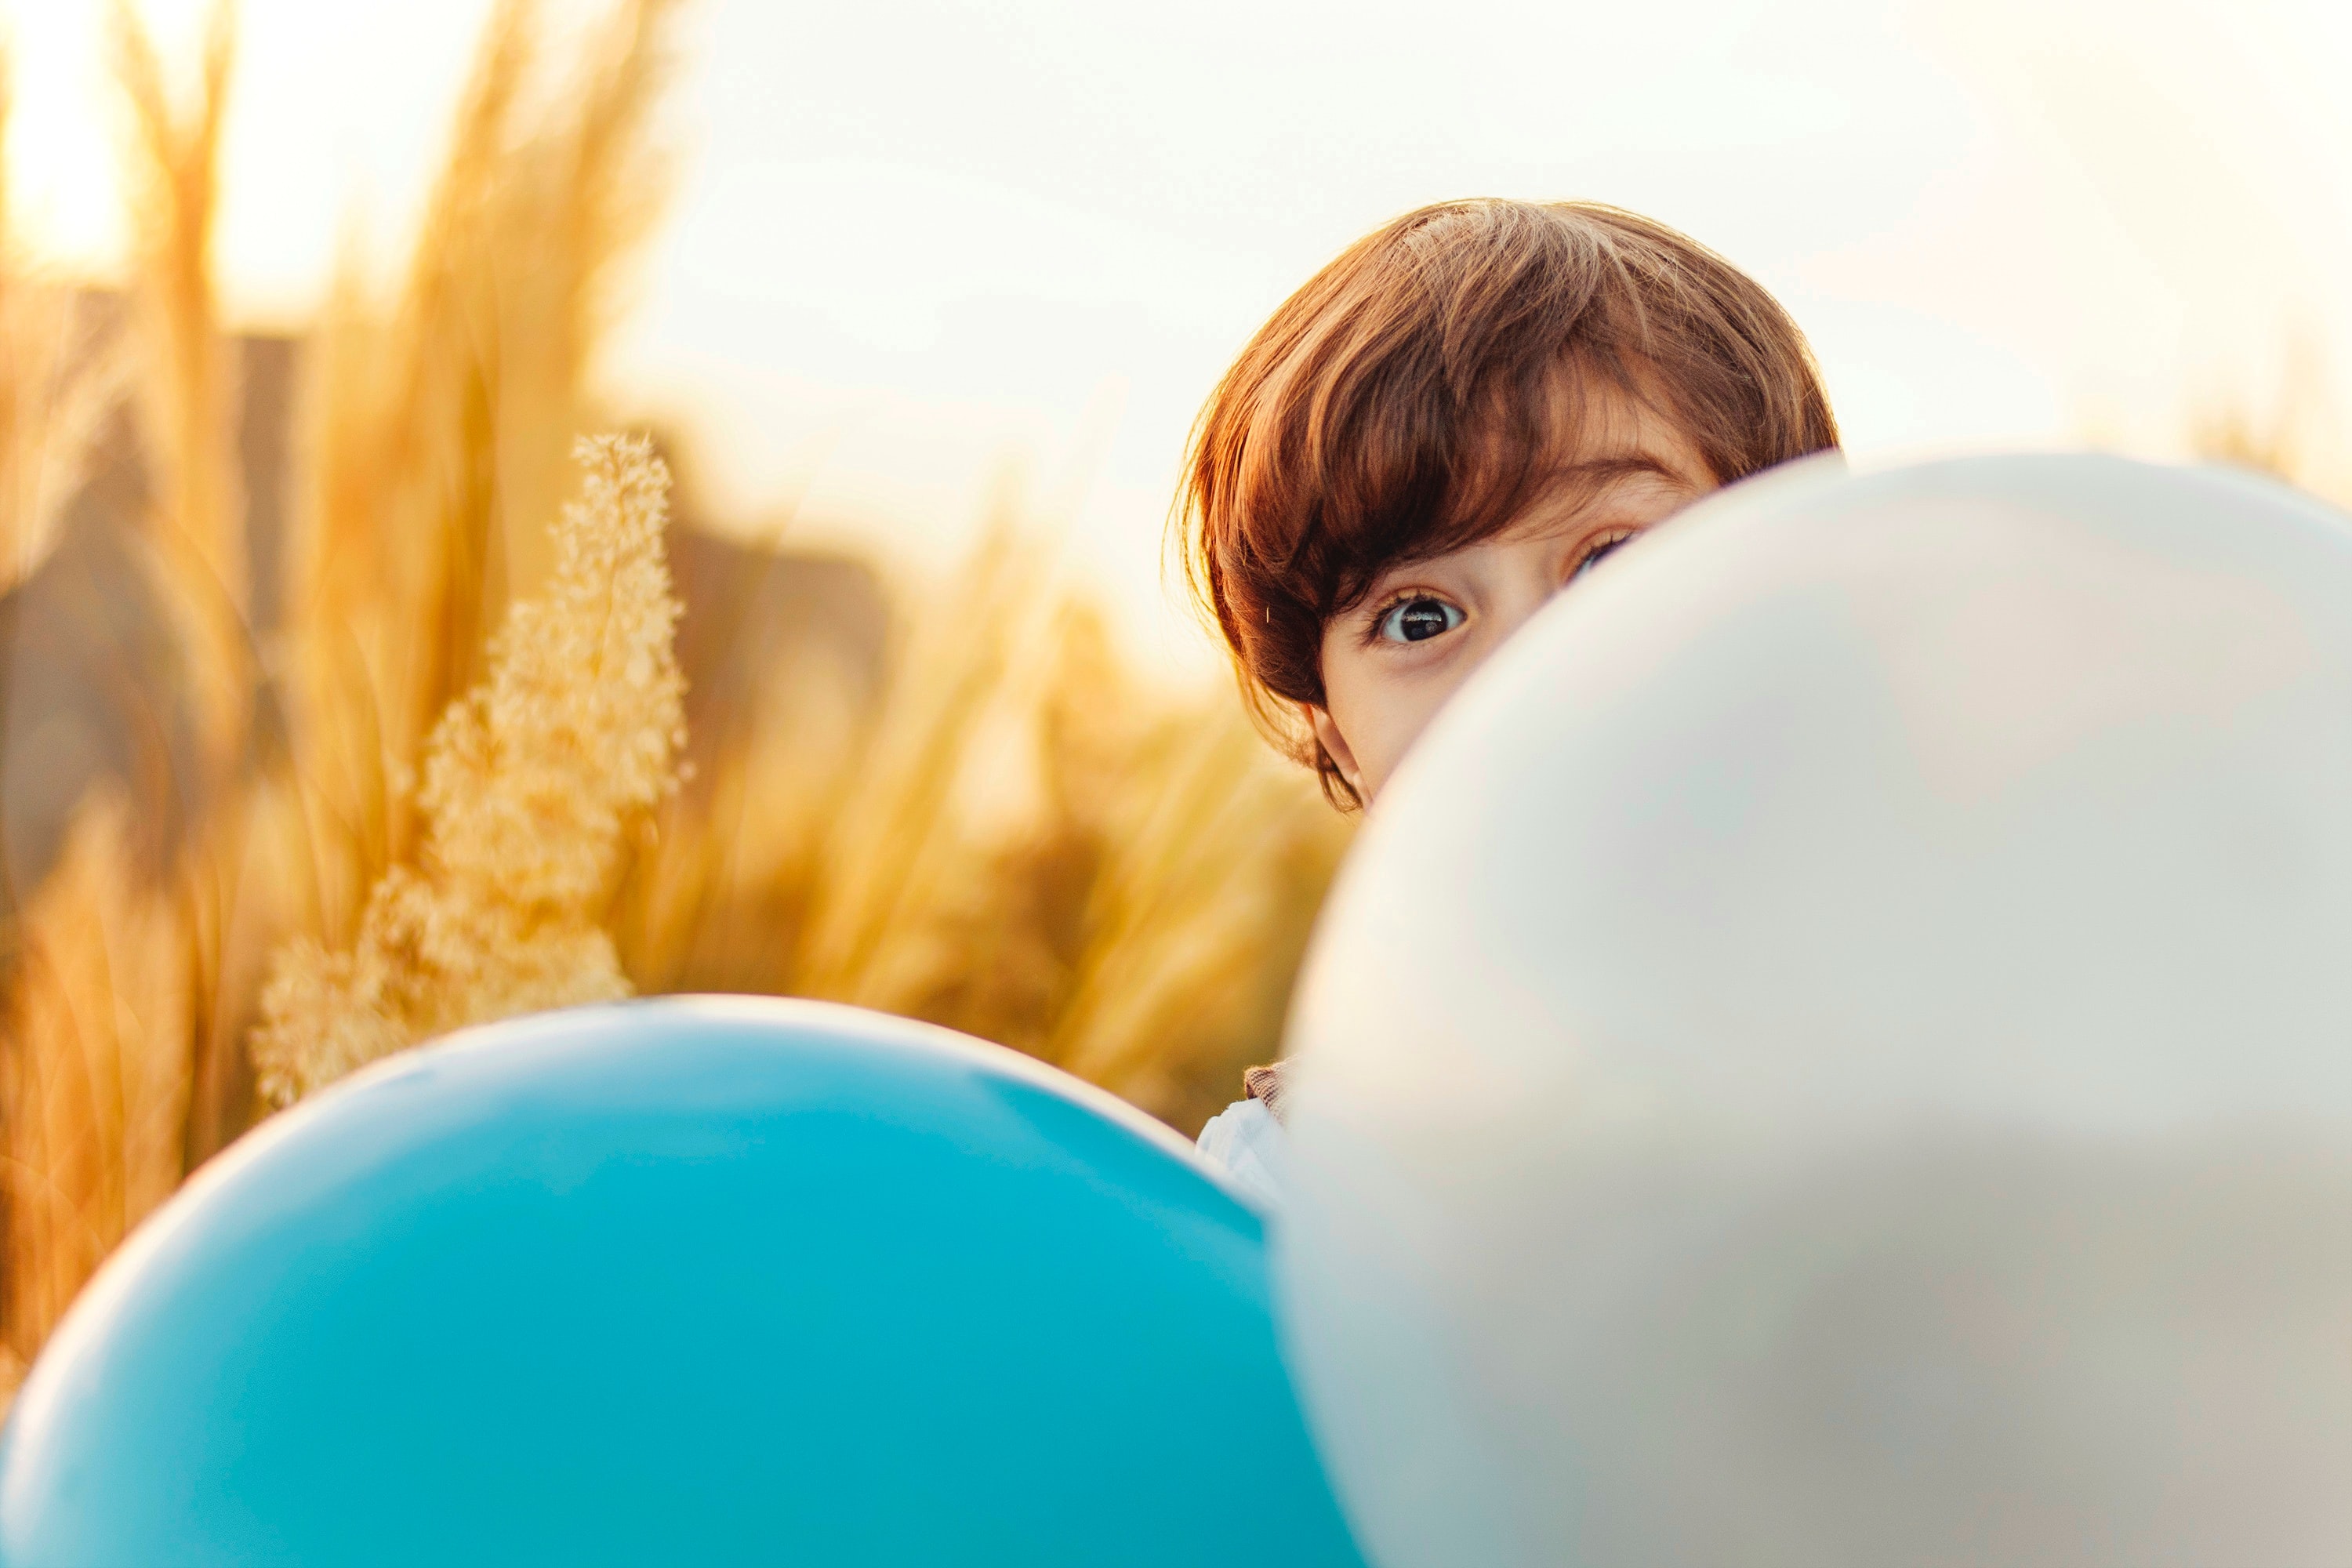 Photo of 5-year-old boy and balloons